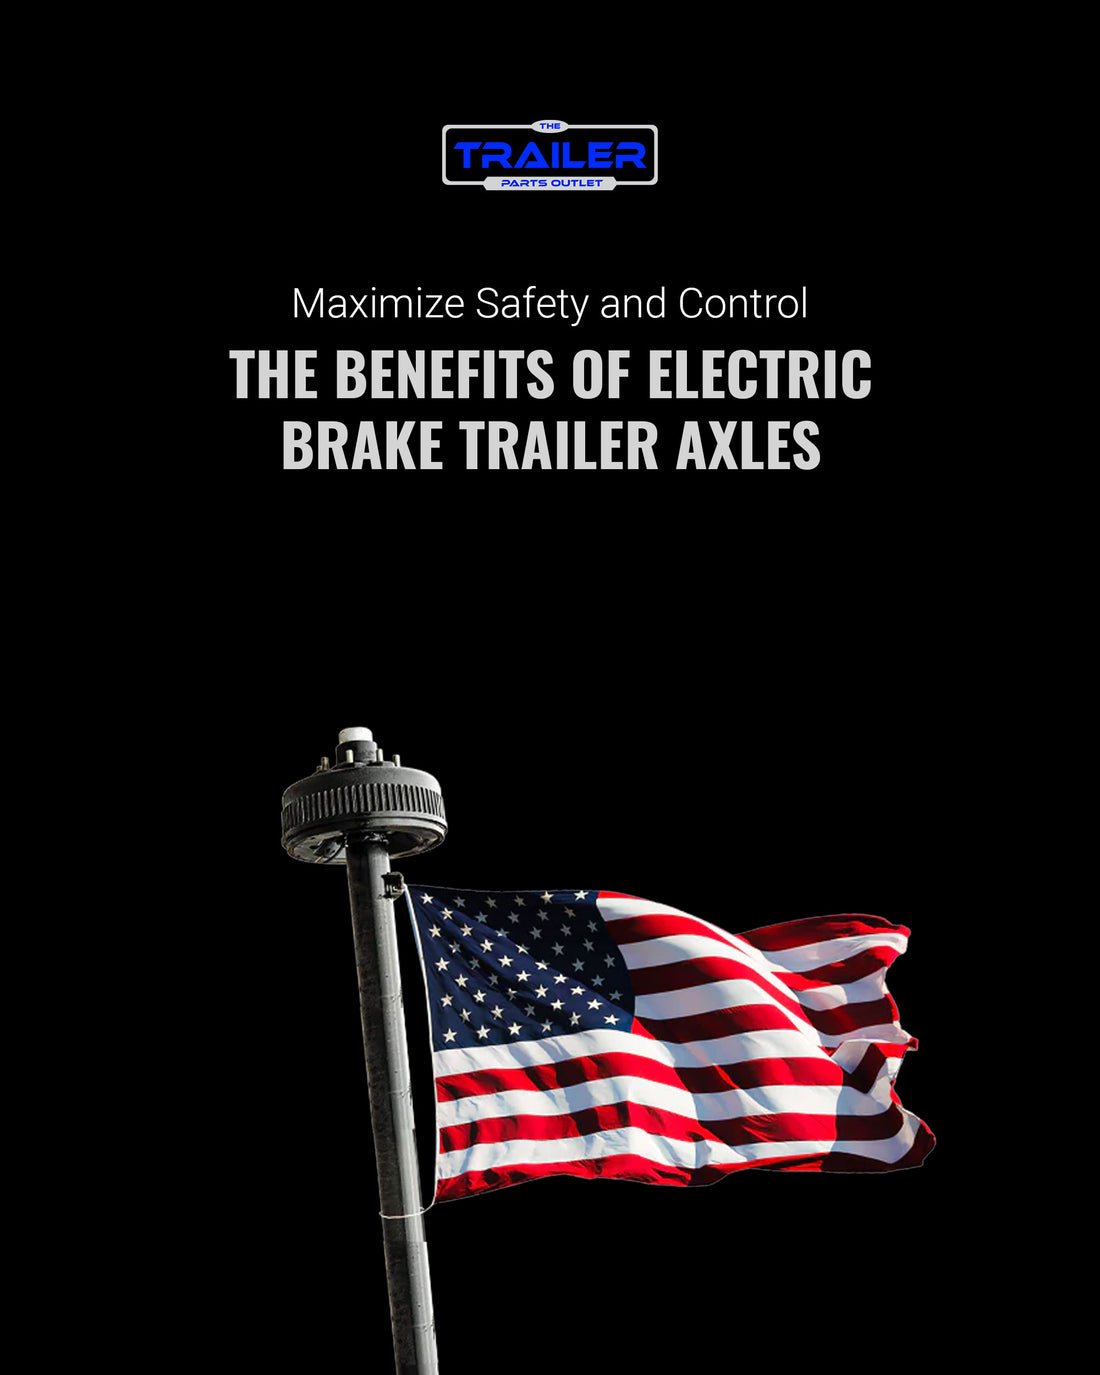 Maximize Safety and Control: The Benefits of Electric Brake Trailer Axles